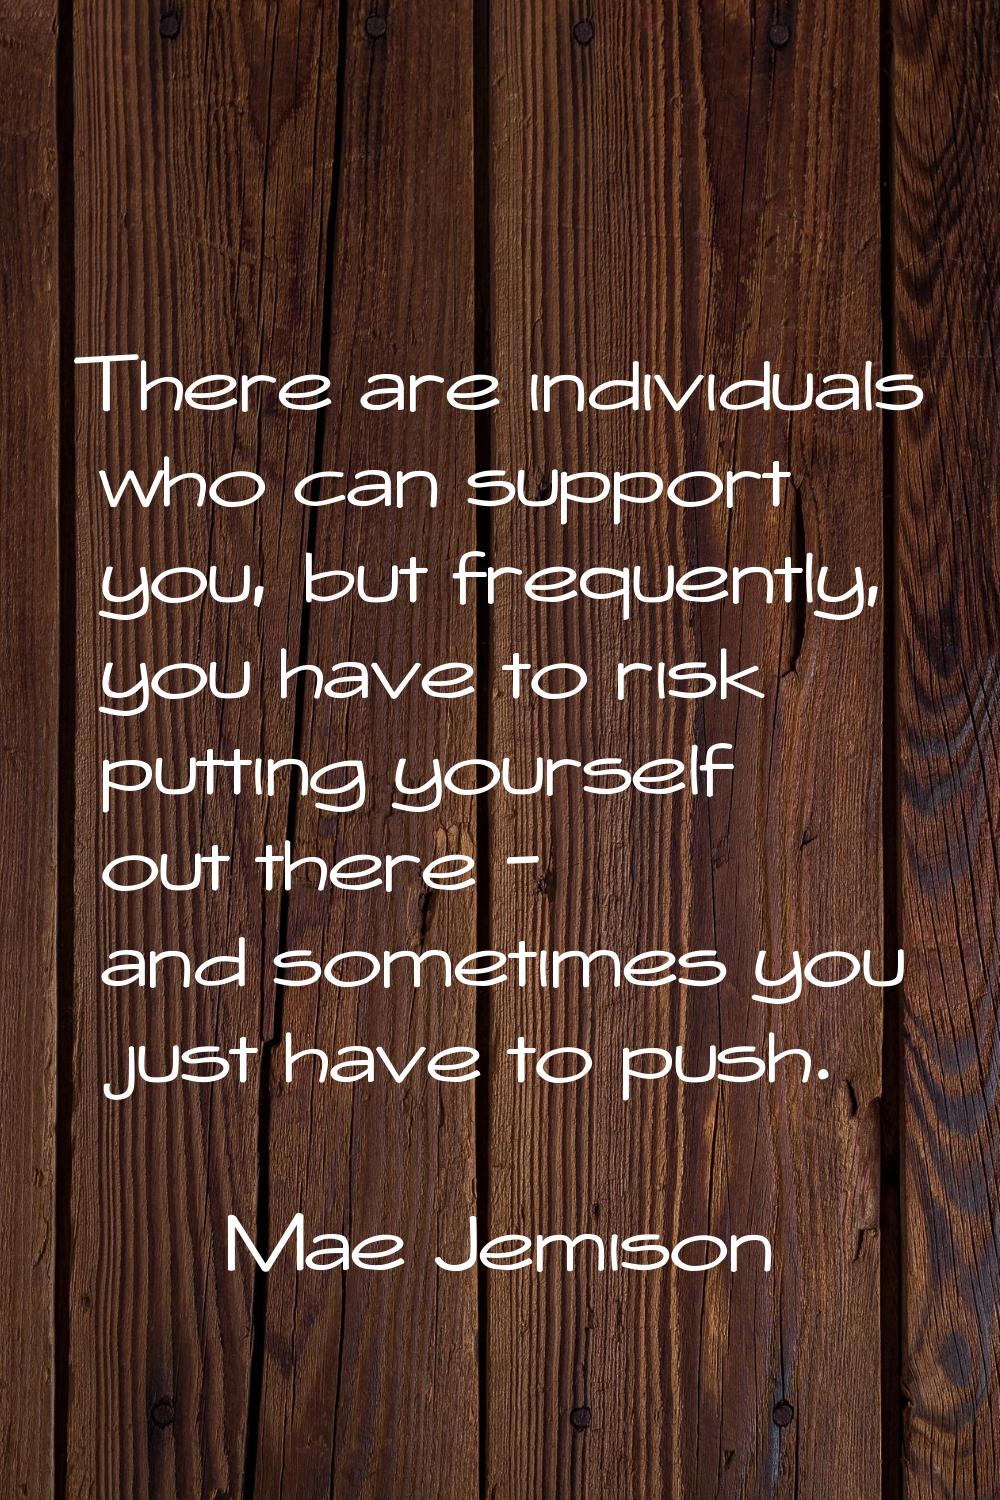 There are individuals who can support you, but frequently, you have to risk putting yourself out th